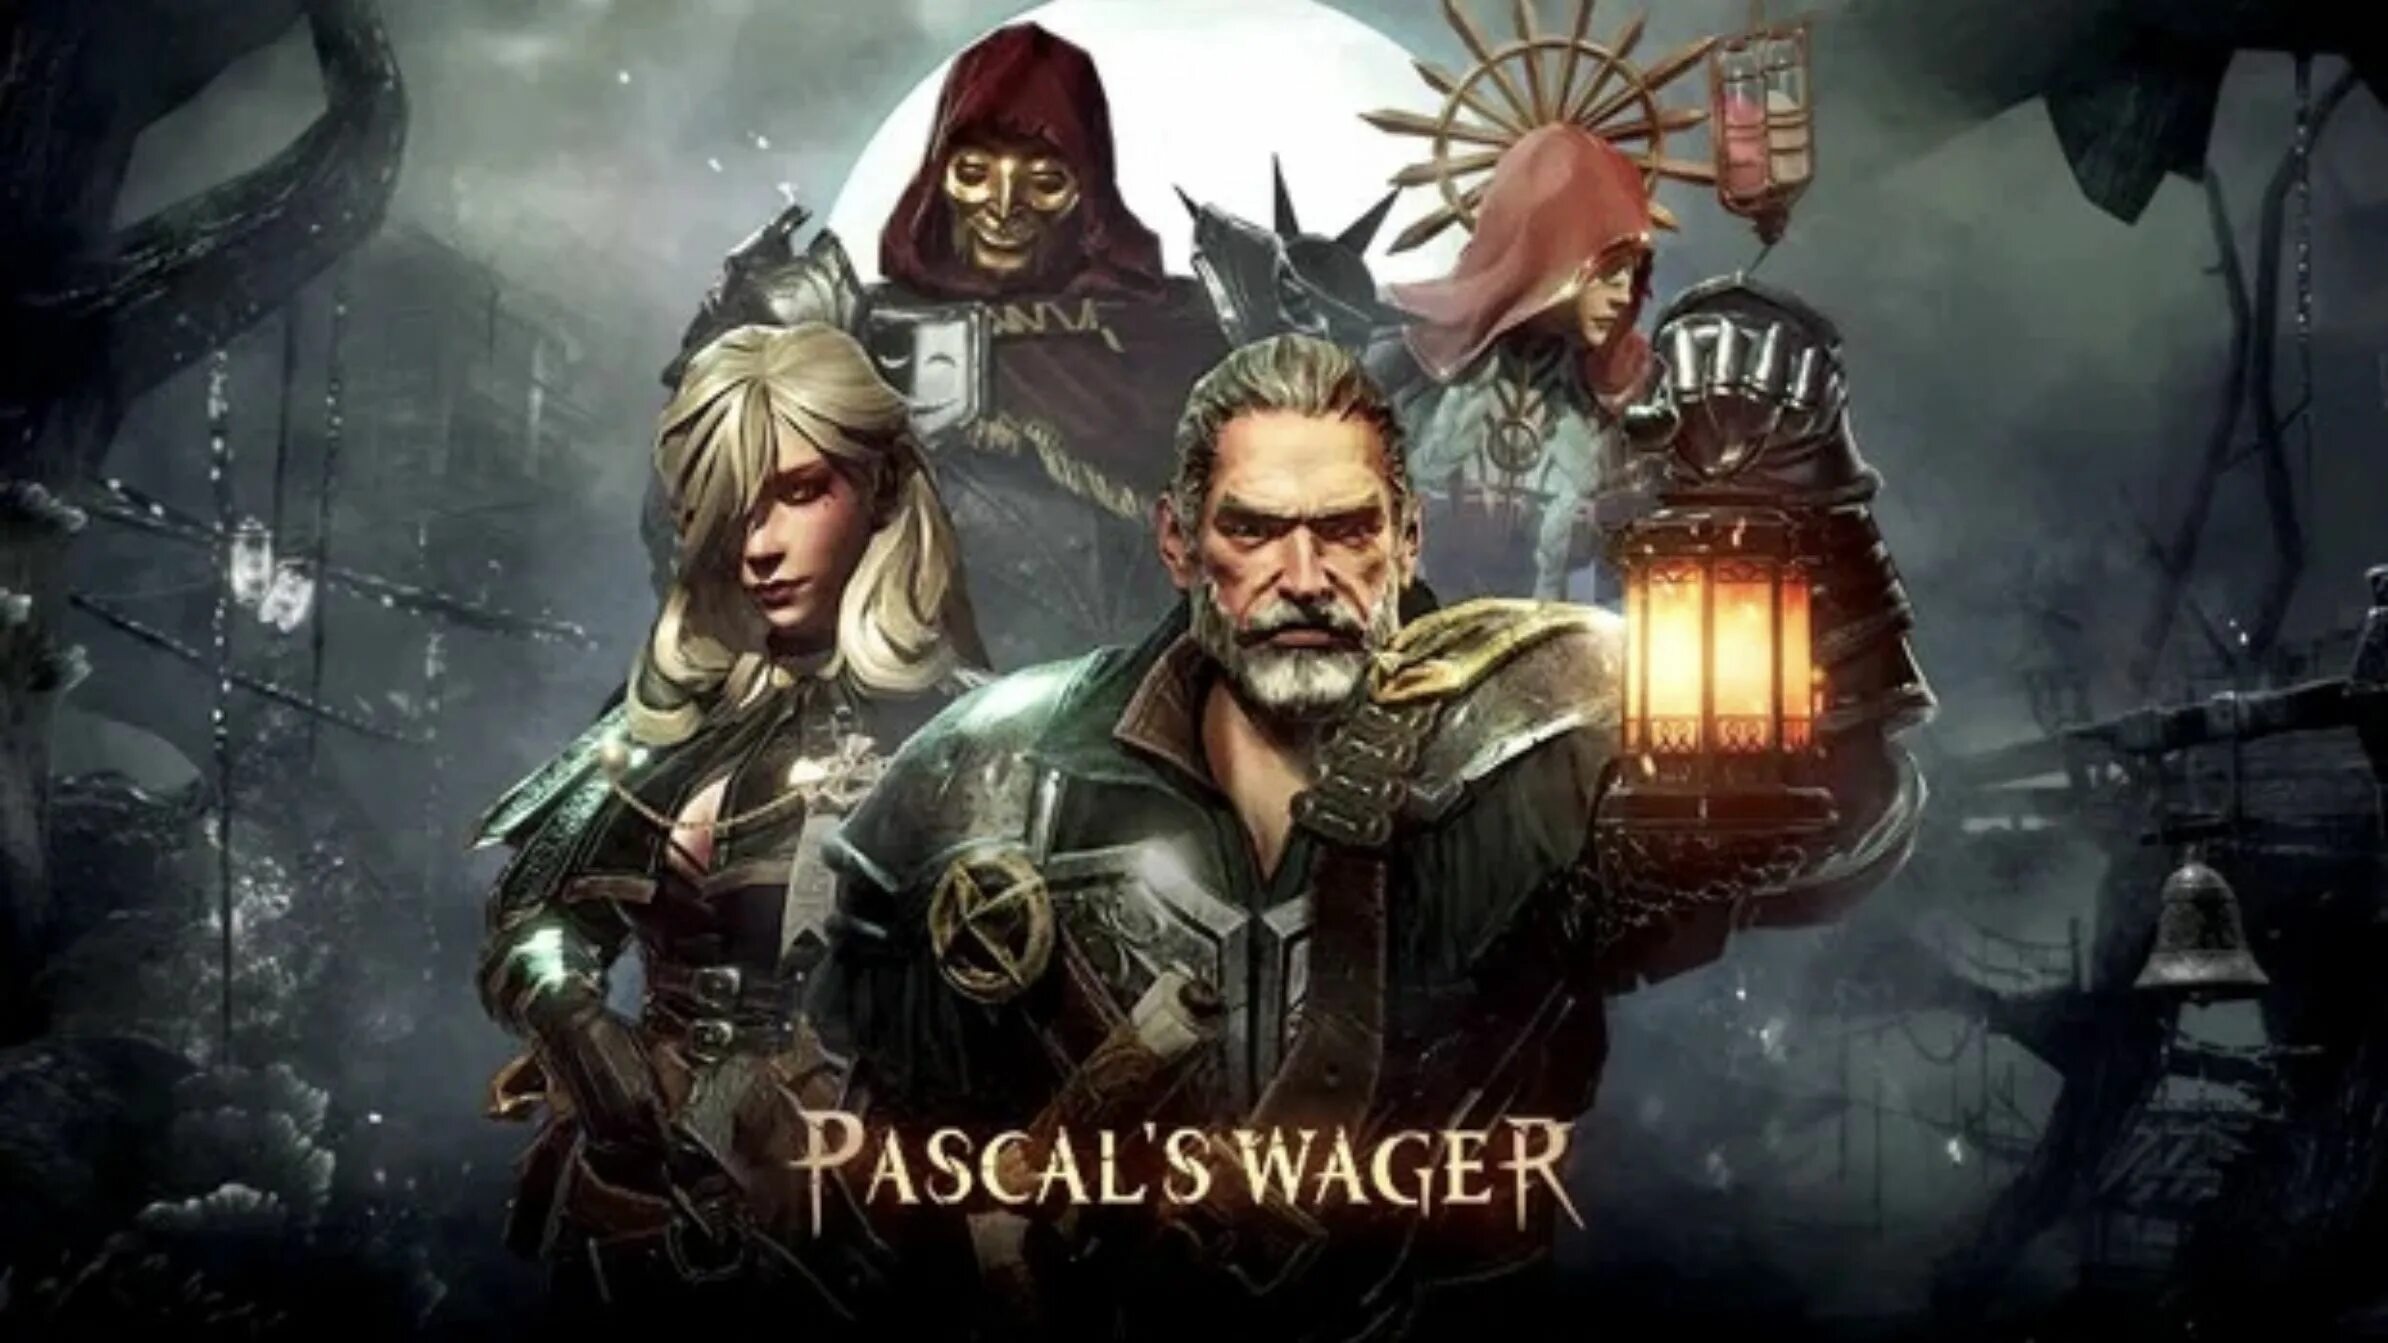 Pascal's Wager: Definitive Edition. Pascal Wager Android. Pascal's Wager на ПК. Pascal's Wager Definitive Edition Нинтендо. Pascals wager definitive